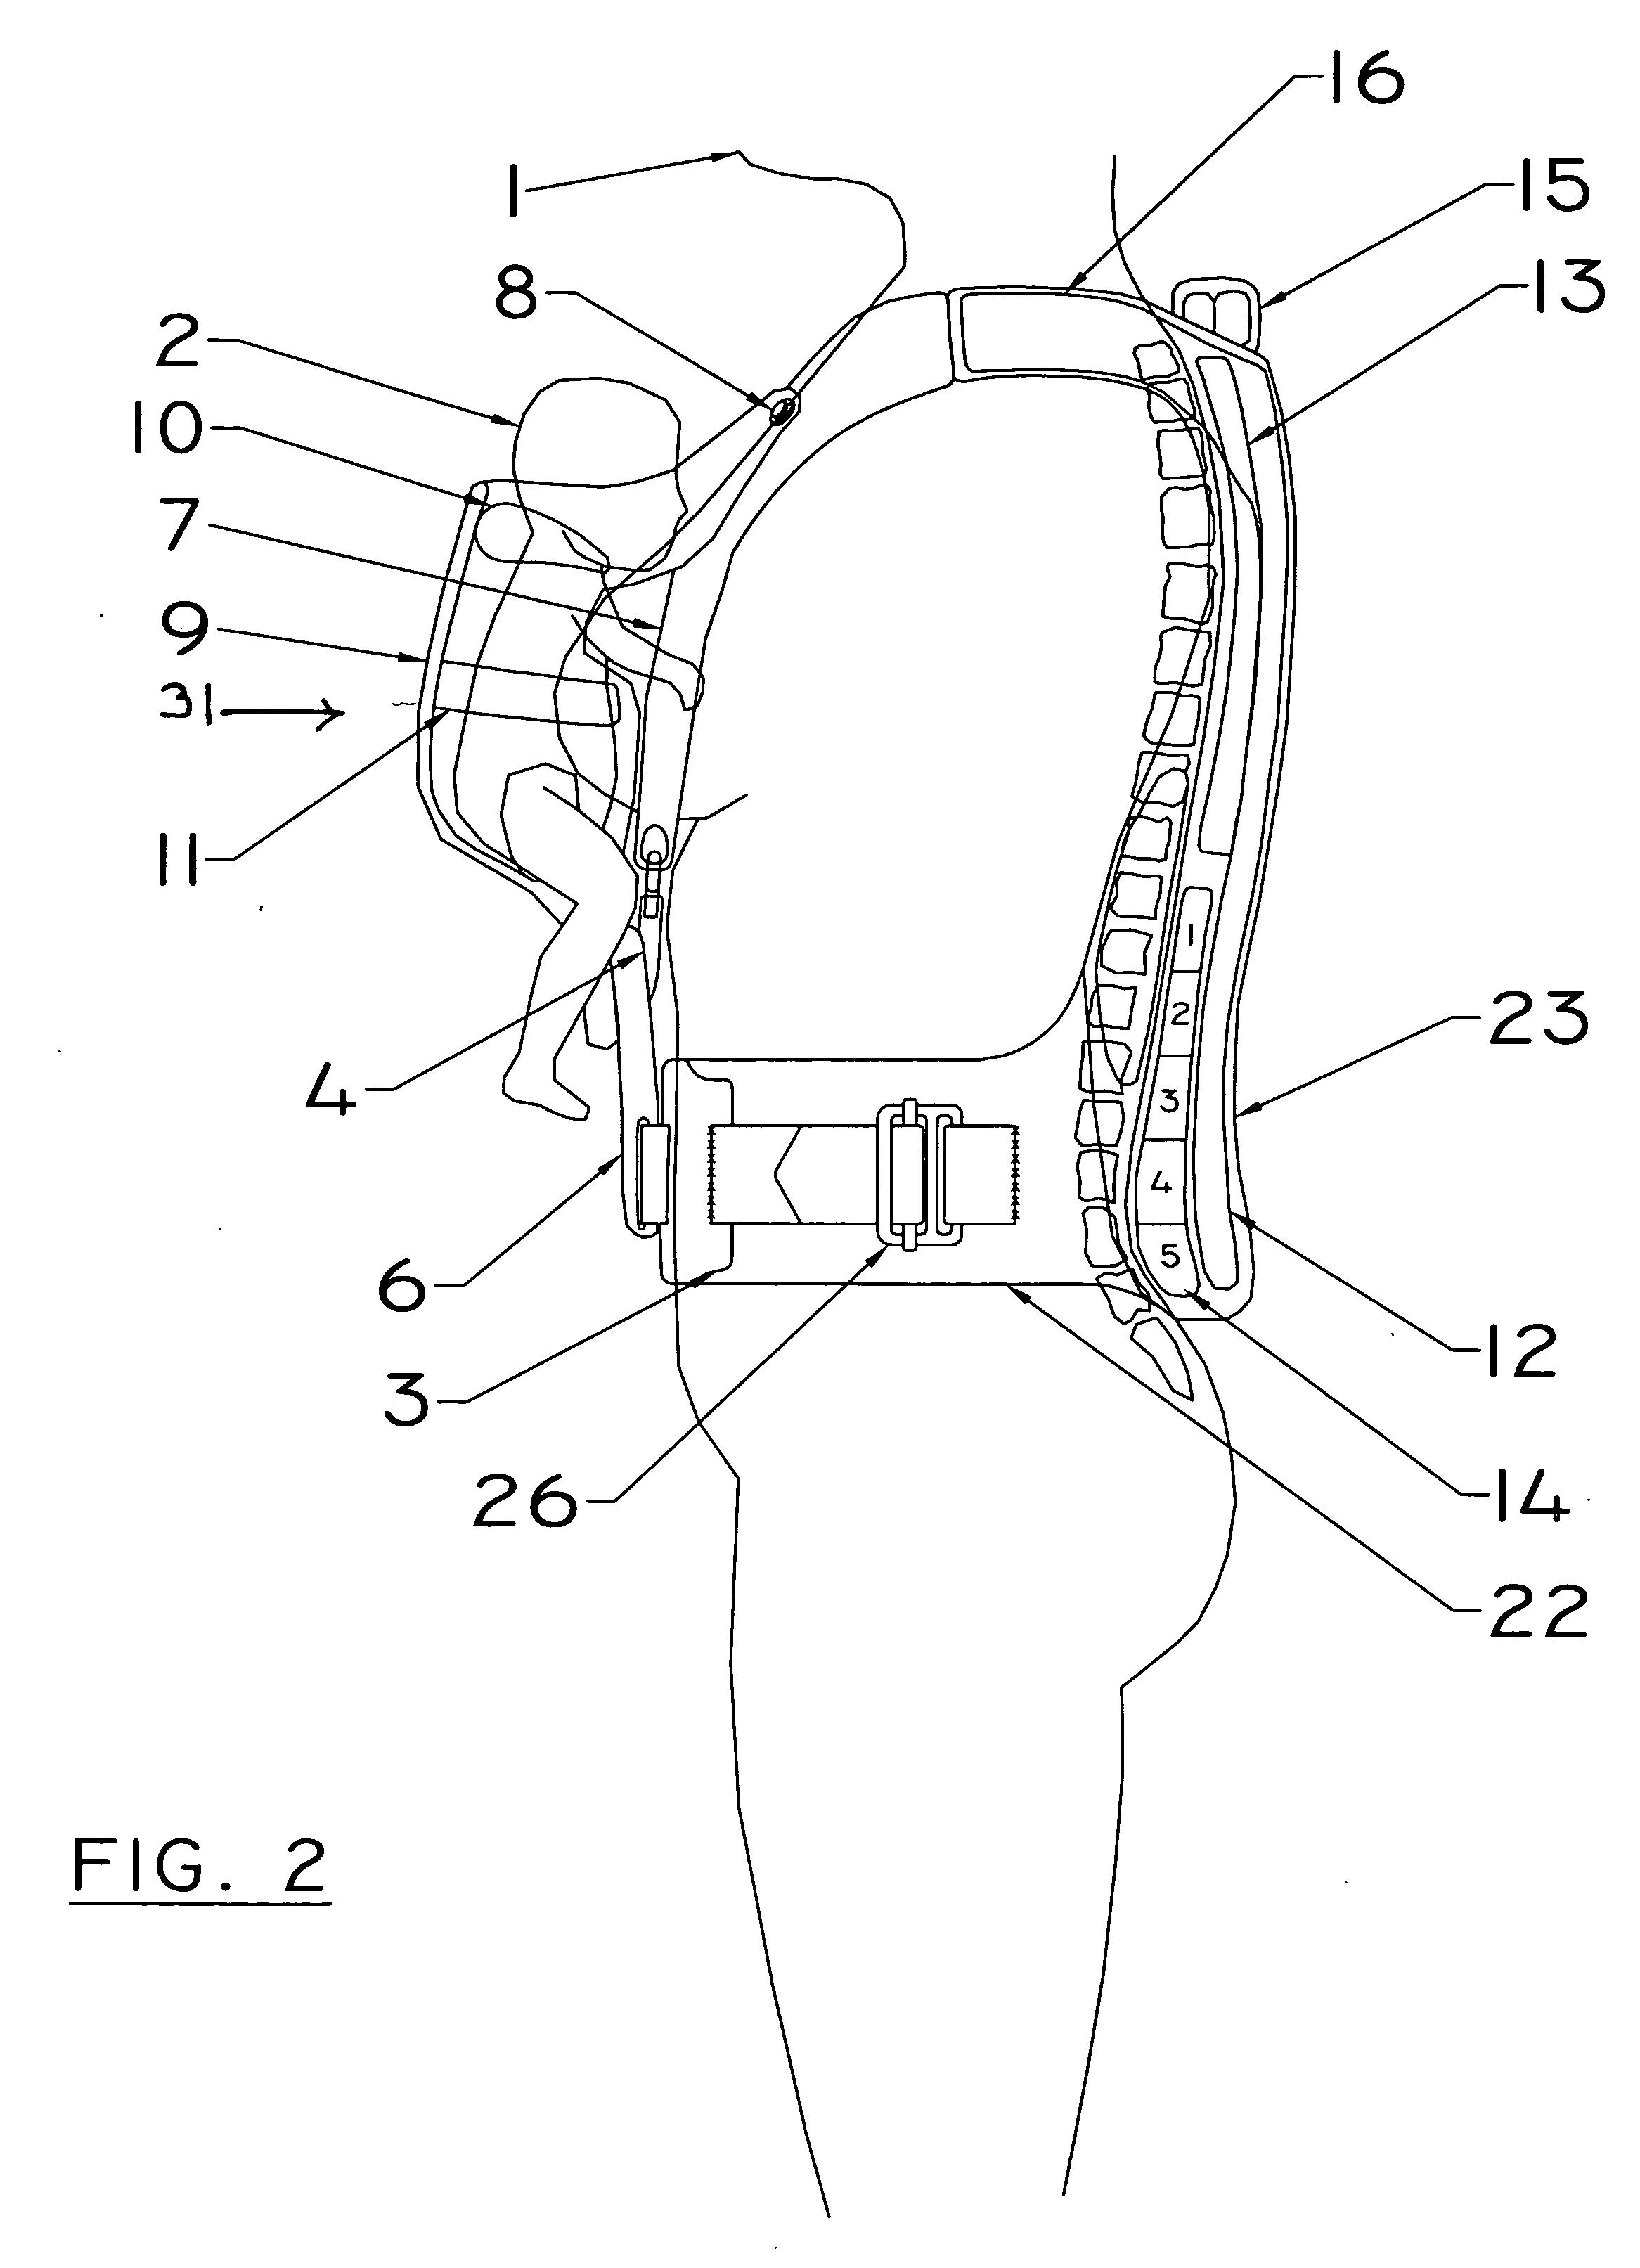 Devices for alleviating back strain and back pain